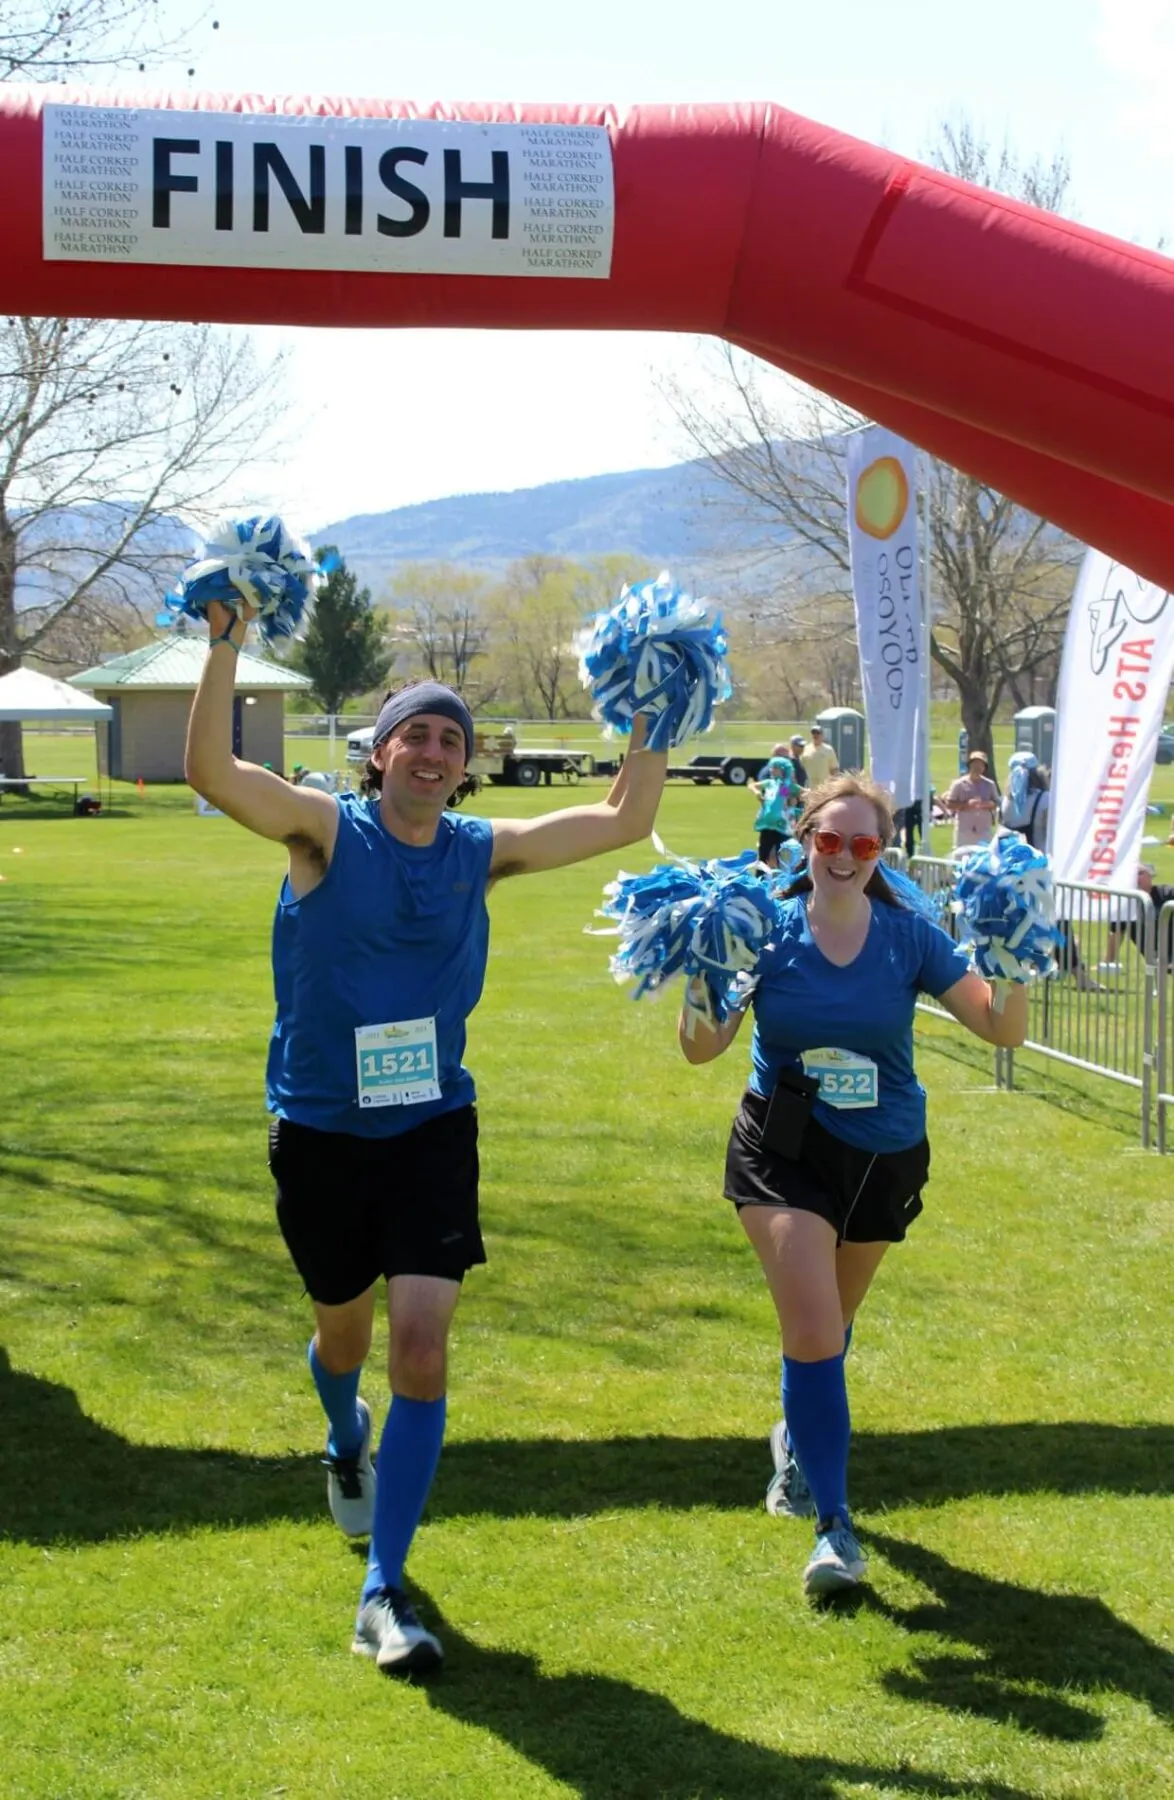 Front view of Gemma and Ricky approaching finish line at Half Corked Marathon, dressed as cheerleaders